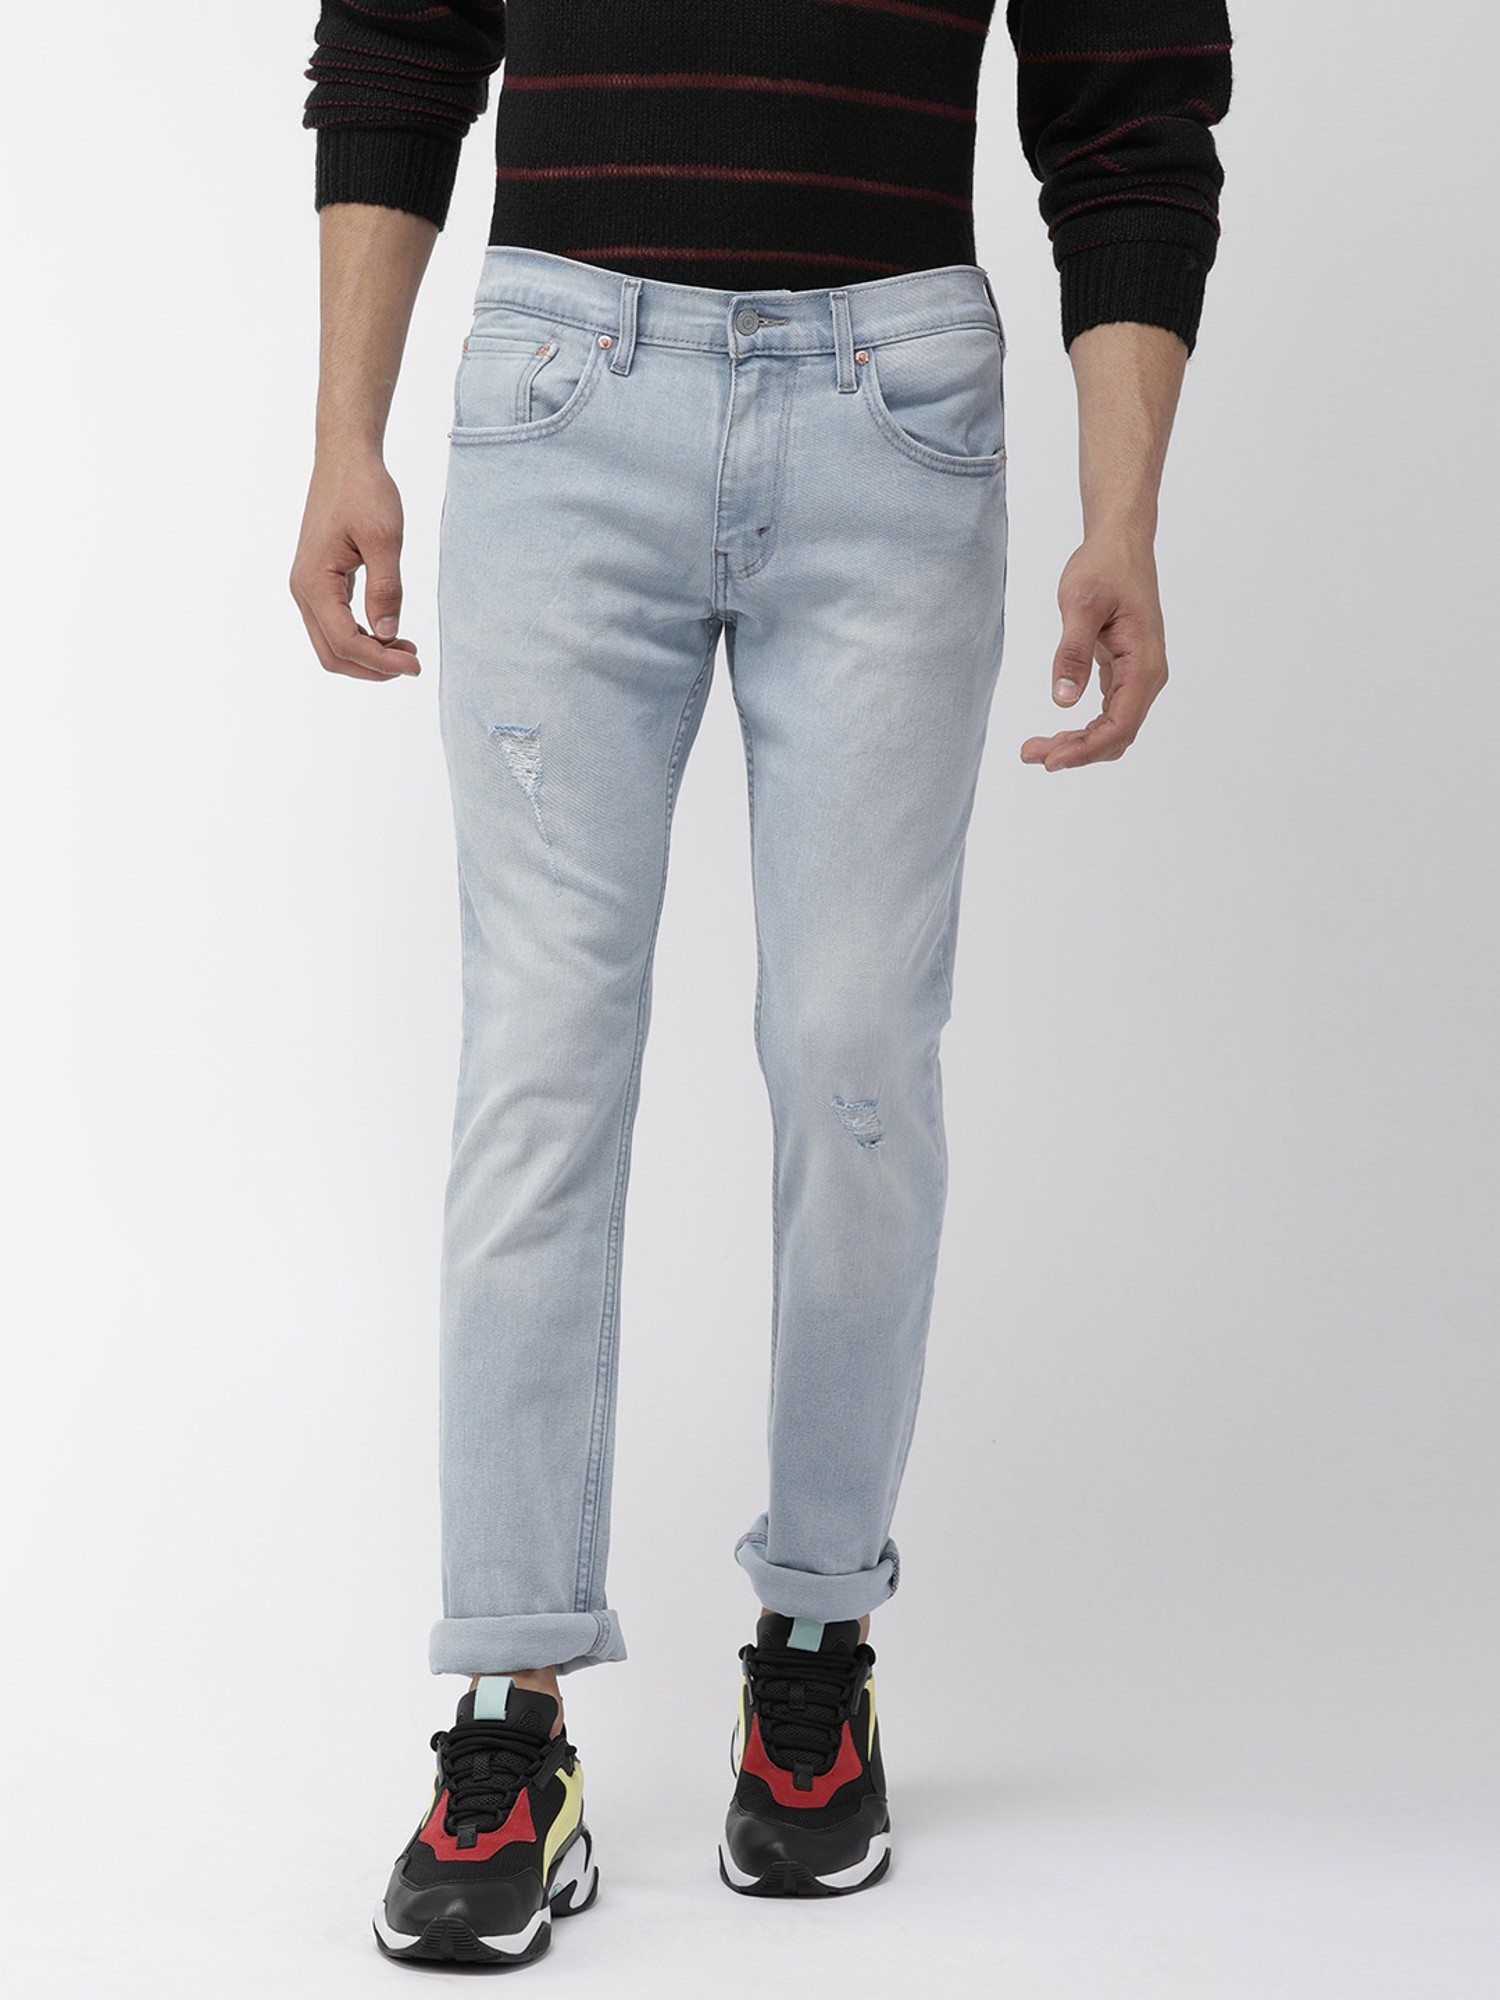 Ripped Jeans For Men  Mens Distressed Jeans  Levis US